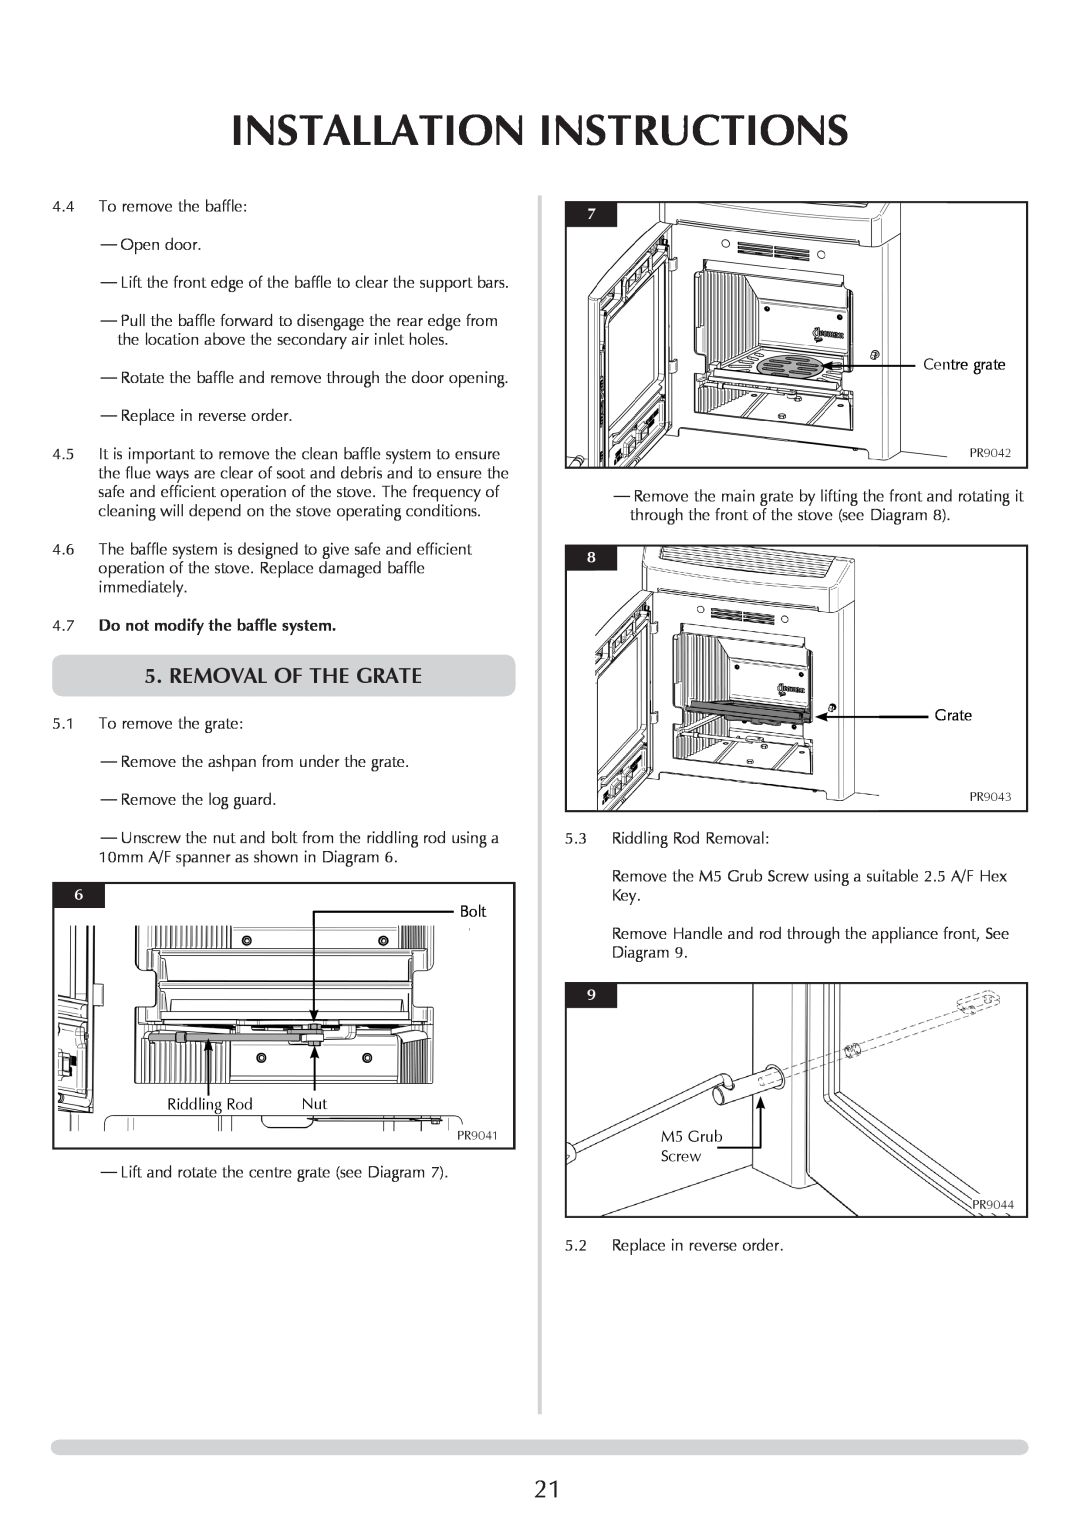 Yeoman YMMB manual Removal Of The Grate, Installation Instructions, 4.7Do not modify the baffle system 